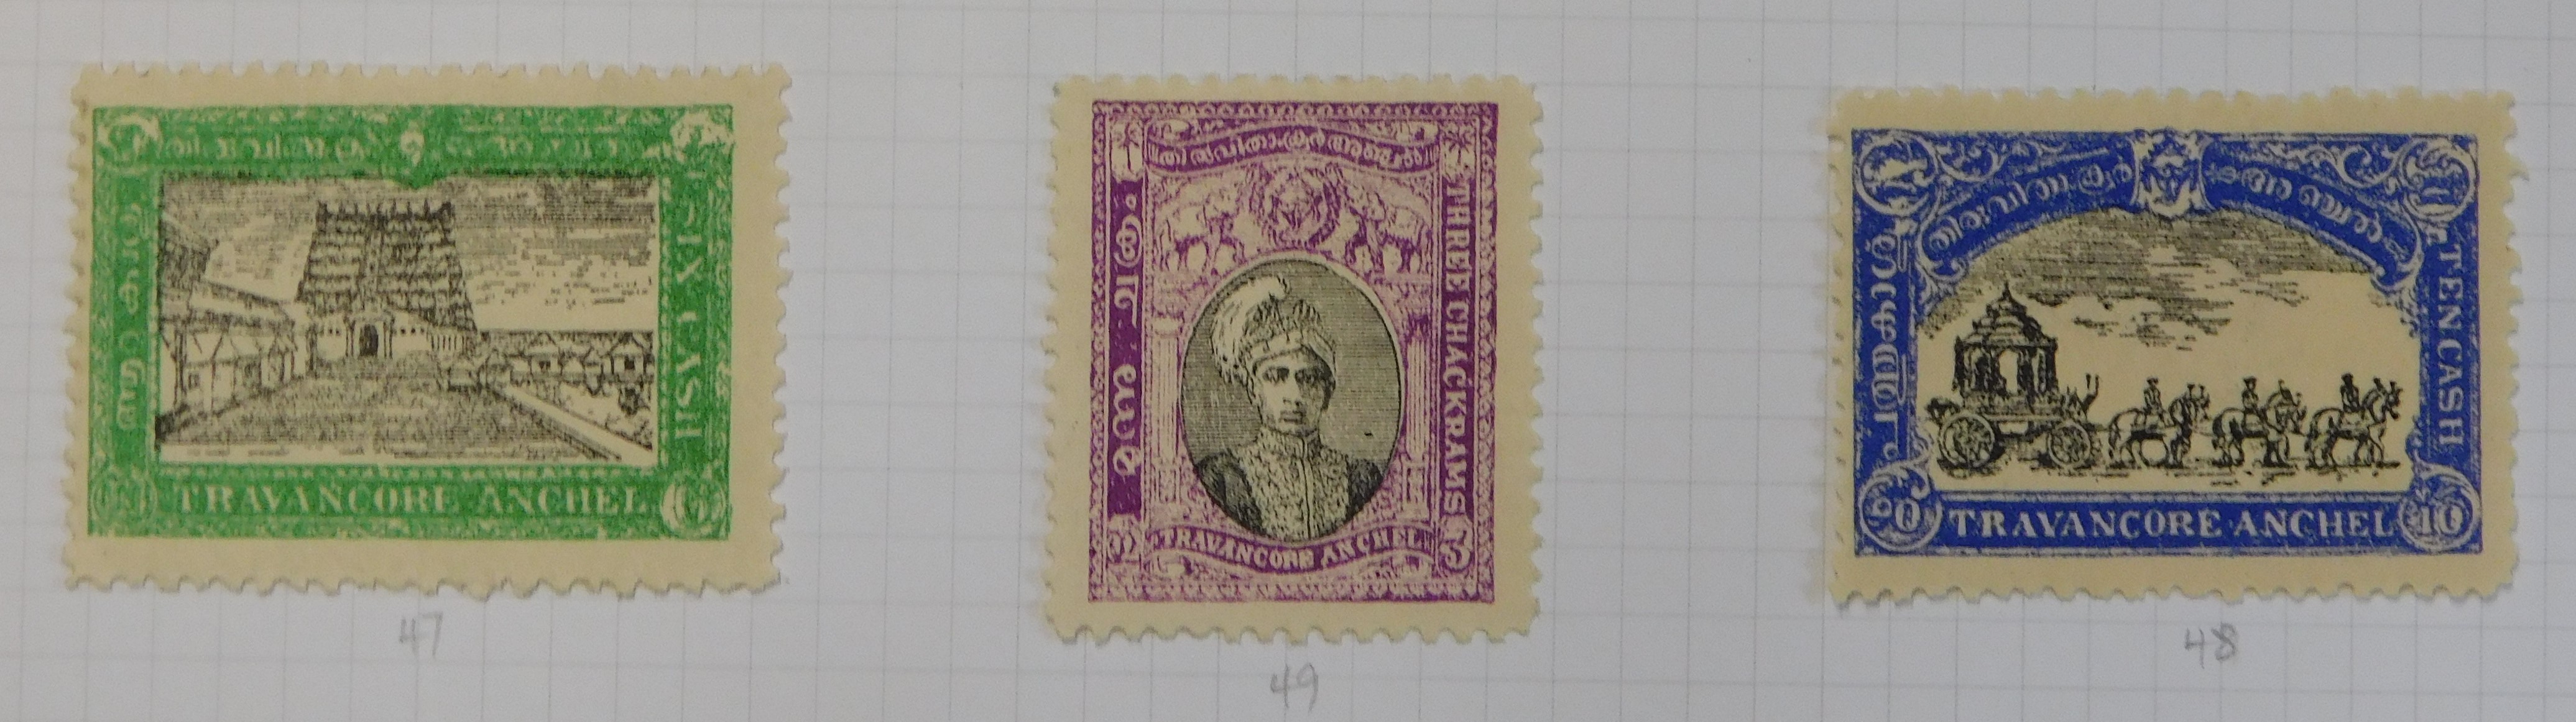 India (Travancore) 1931-1932 mint and fine used includes varieties including overprint double and - Image 4 of 5